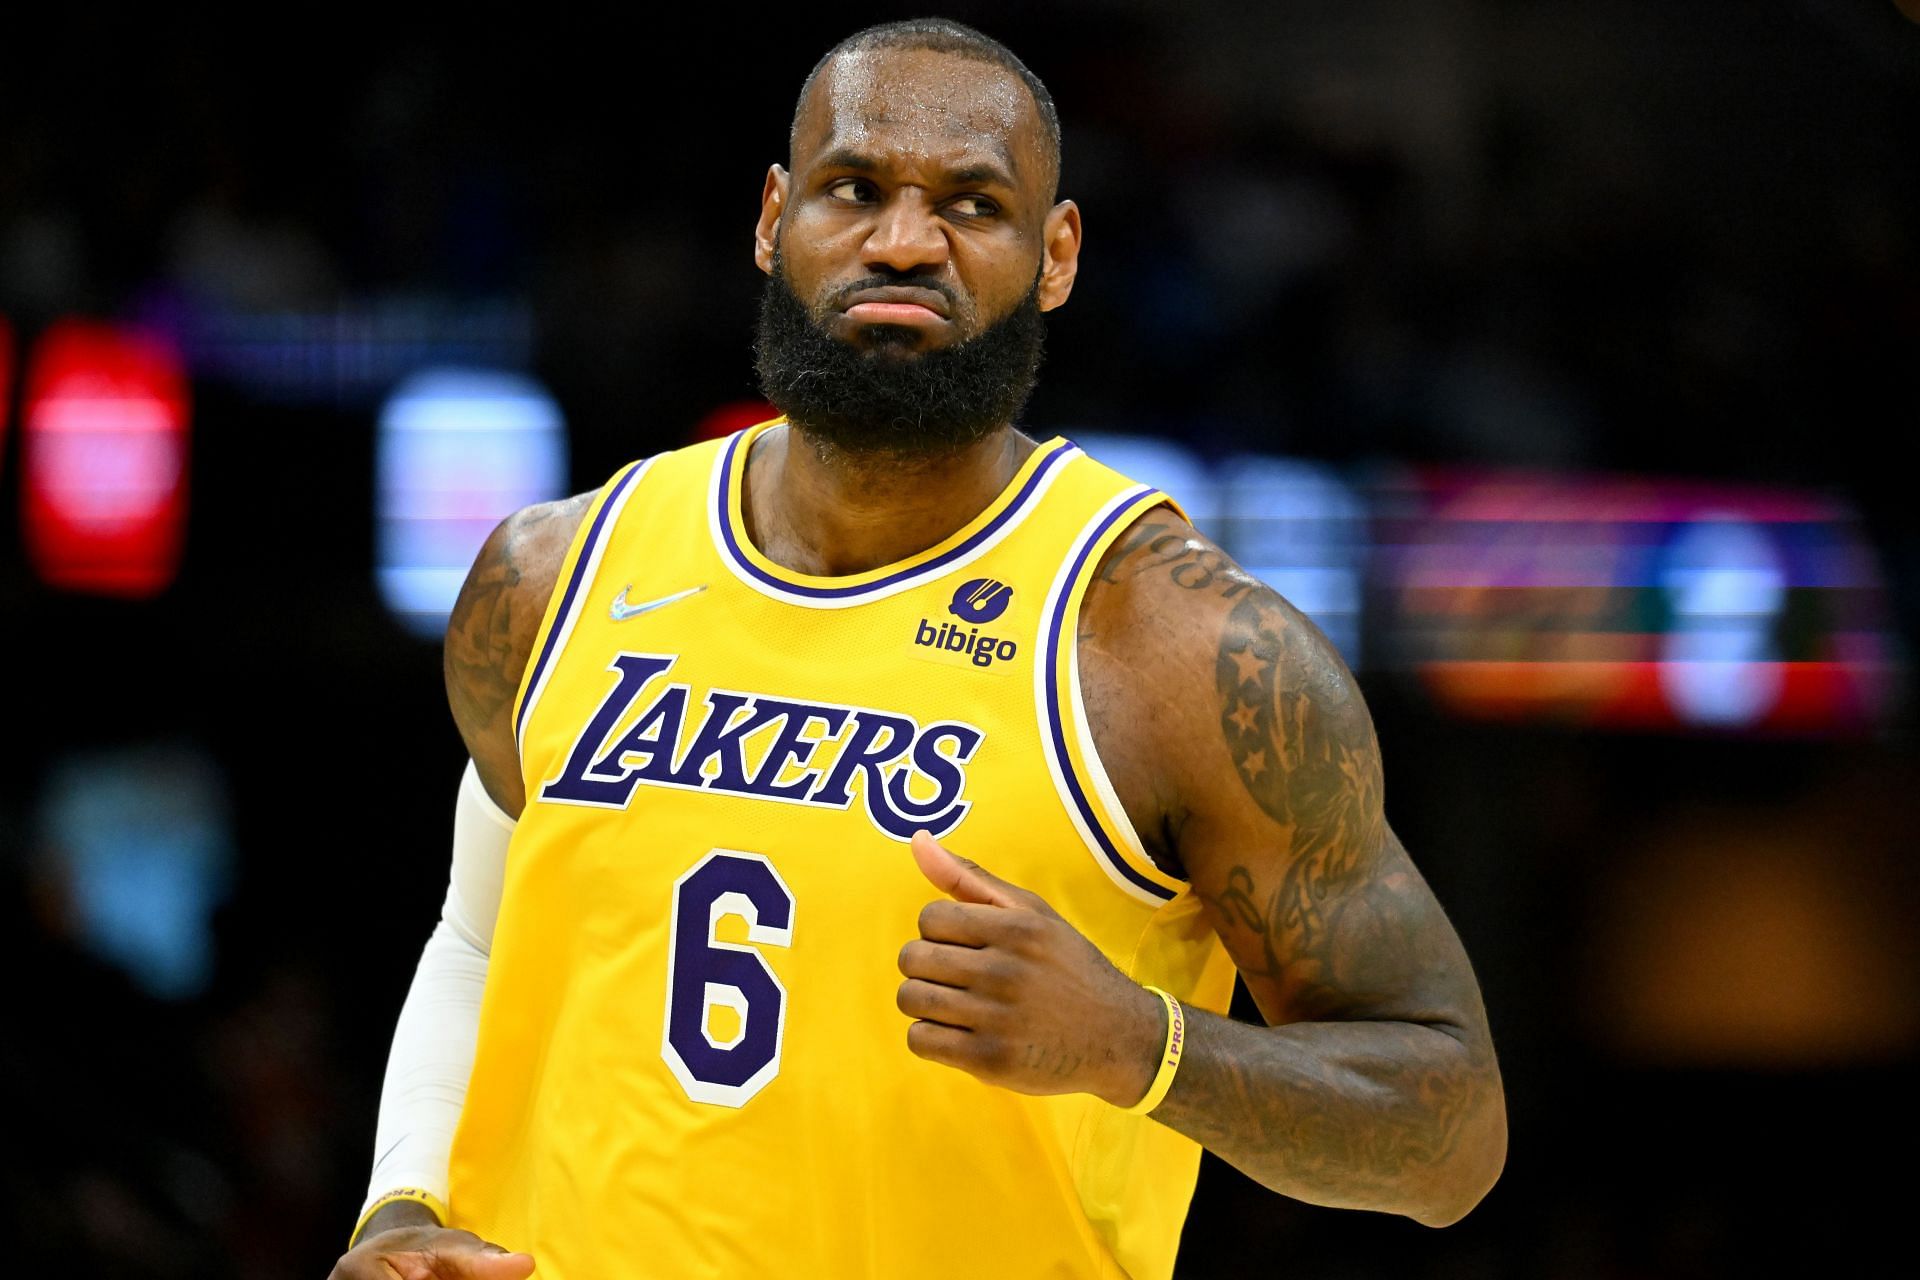 LeBron James of the LA Lakers celebrates during the fourth quarter against the Cleveland Cavaliers at Rocket Mortgage Fieldhouse on March 21 in Cleveland, Ohio. The Lakers defeated the Cavaliers 131-120.